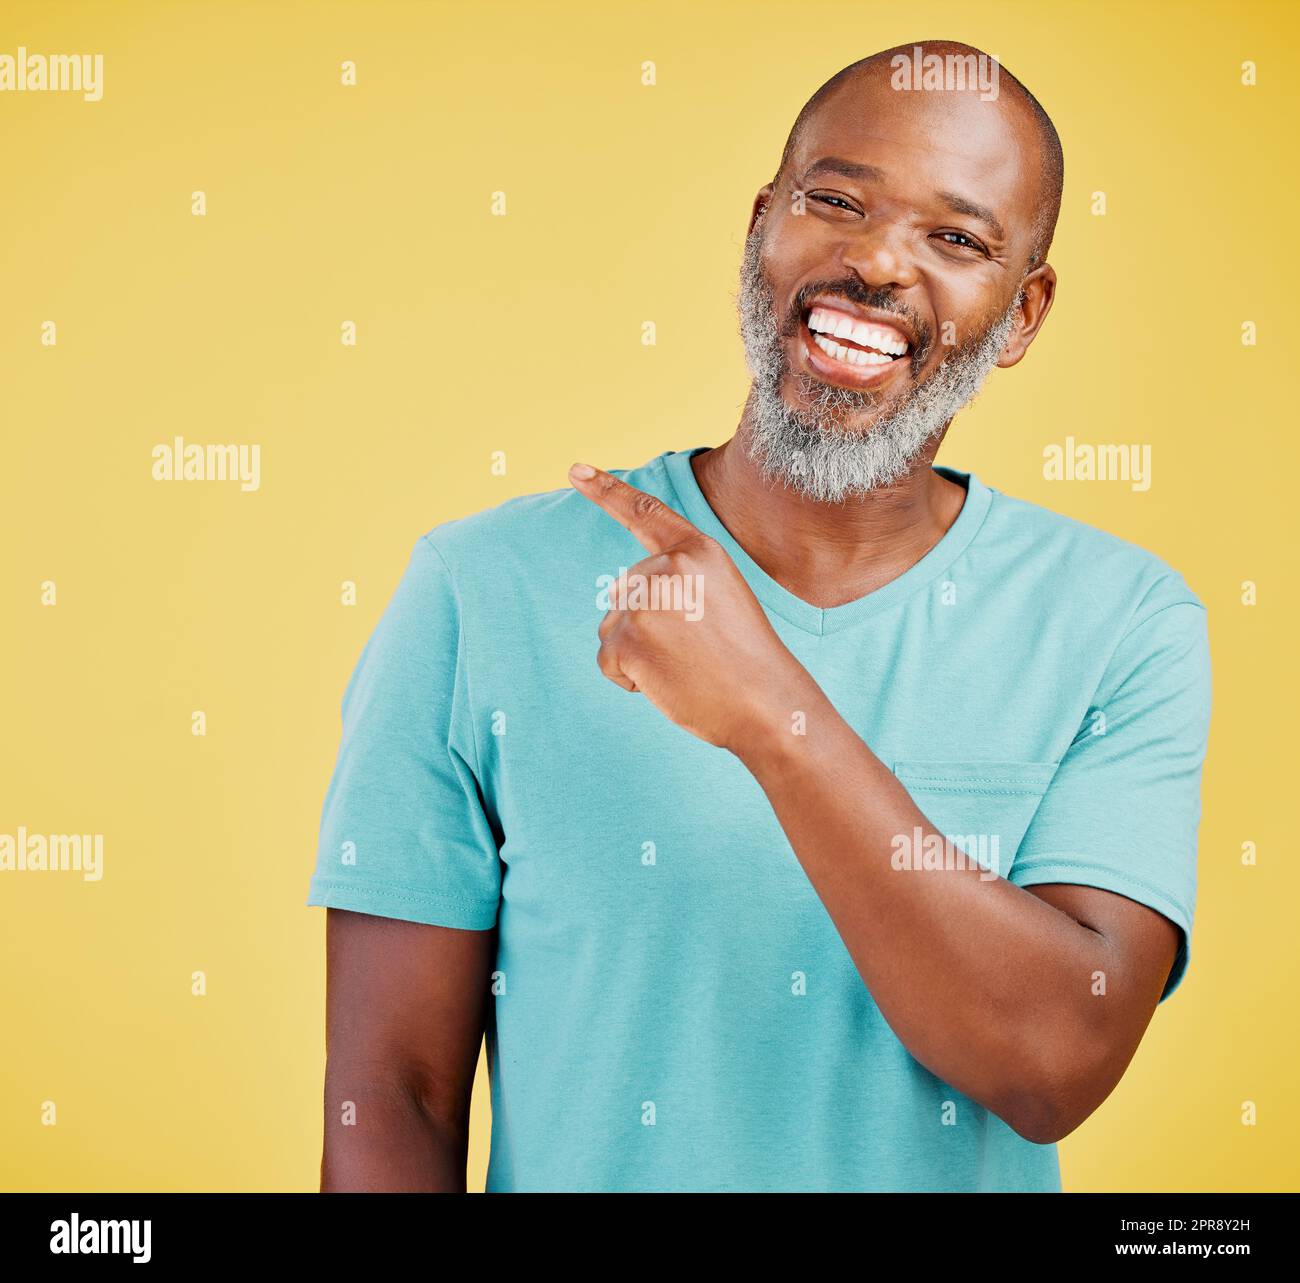 Mature african man laughing and pointing in a direction against a yellow studio background. Black guy giggling and making a pointing gesture reacting with laughter while looking cheerful and happy. Lighten the mood with an amusing and funny joke Stock Photo